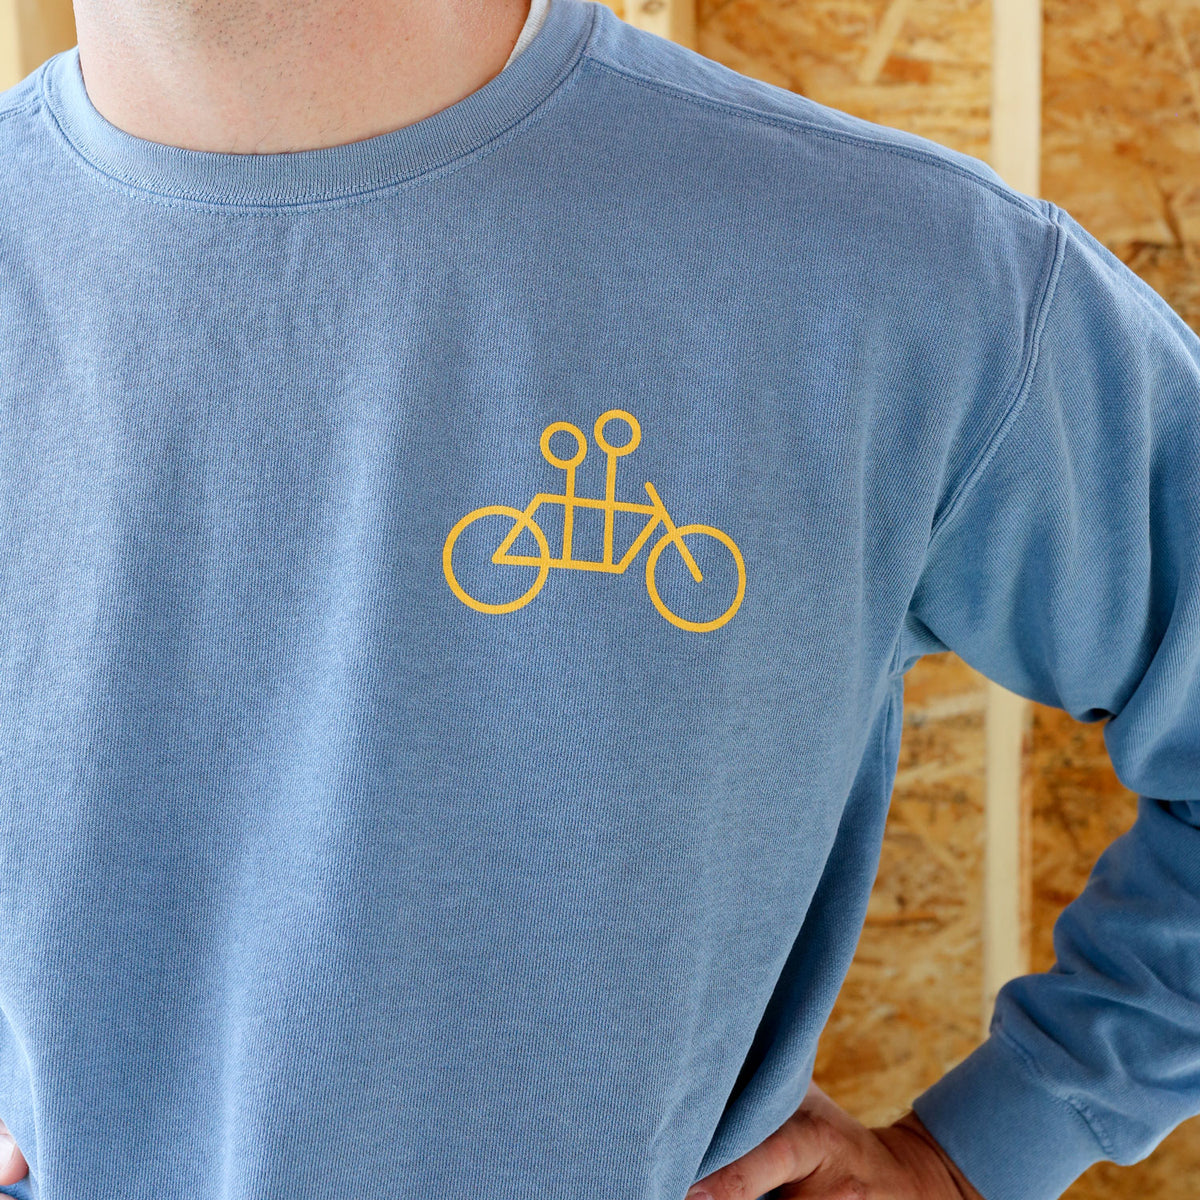 Close-up of a person wearing a Tandem Crewneck Sweatshirt by Tandem Coffee Roasters featuring a yellow minimalist bicycle design on the chest, standing against a wooden background.